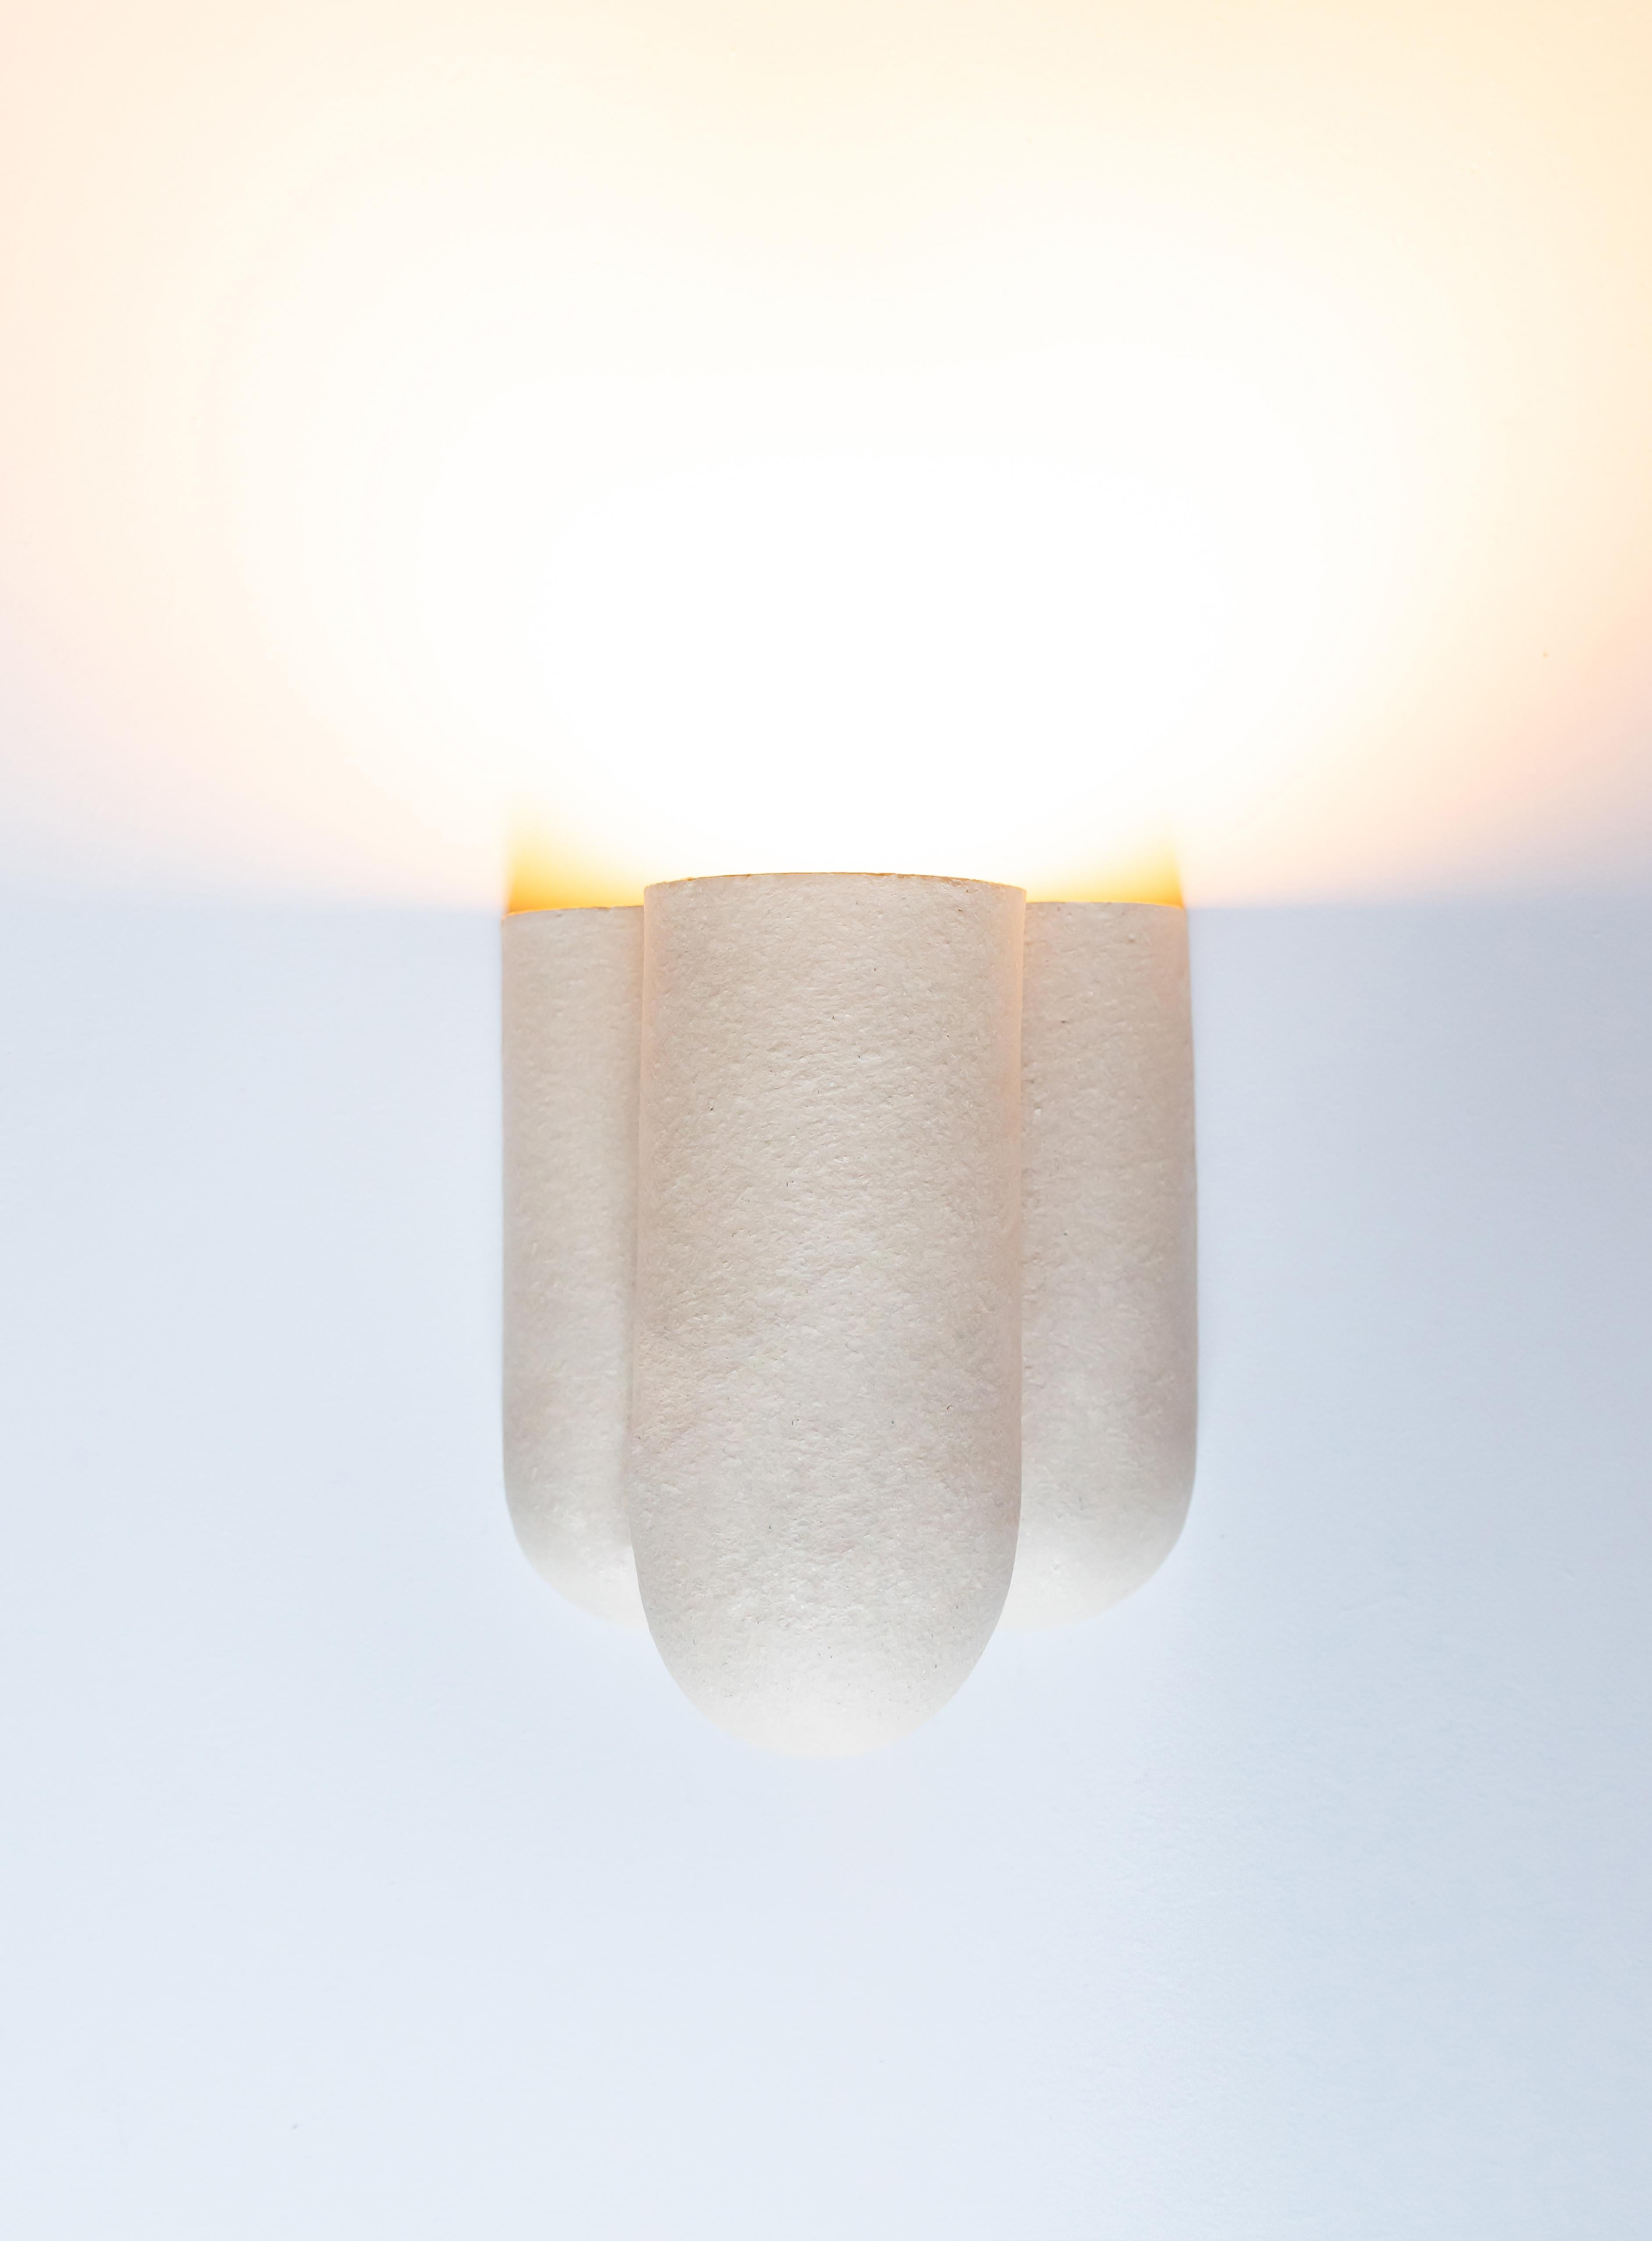 Wall light by Lisa Allegra
Dimensions: W 24 x D 17 x H 22,5 cm
Materials: Clay
Variations available.

Born in 1986 in Paris, Lisa Allegra has earned in 2010 a degree in furniture design from the École Supérieure des Arts Décoratifs. She has